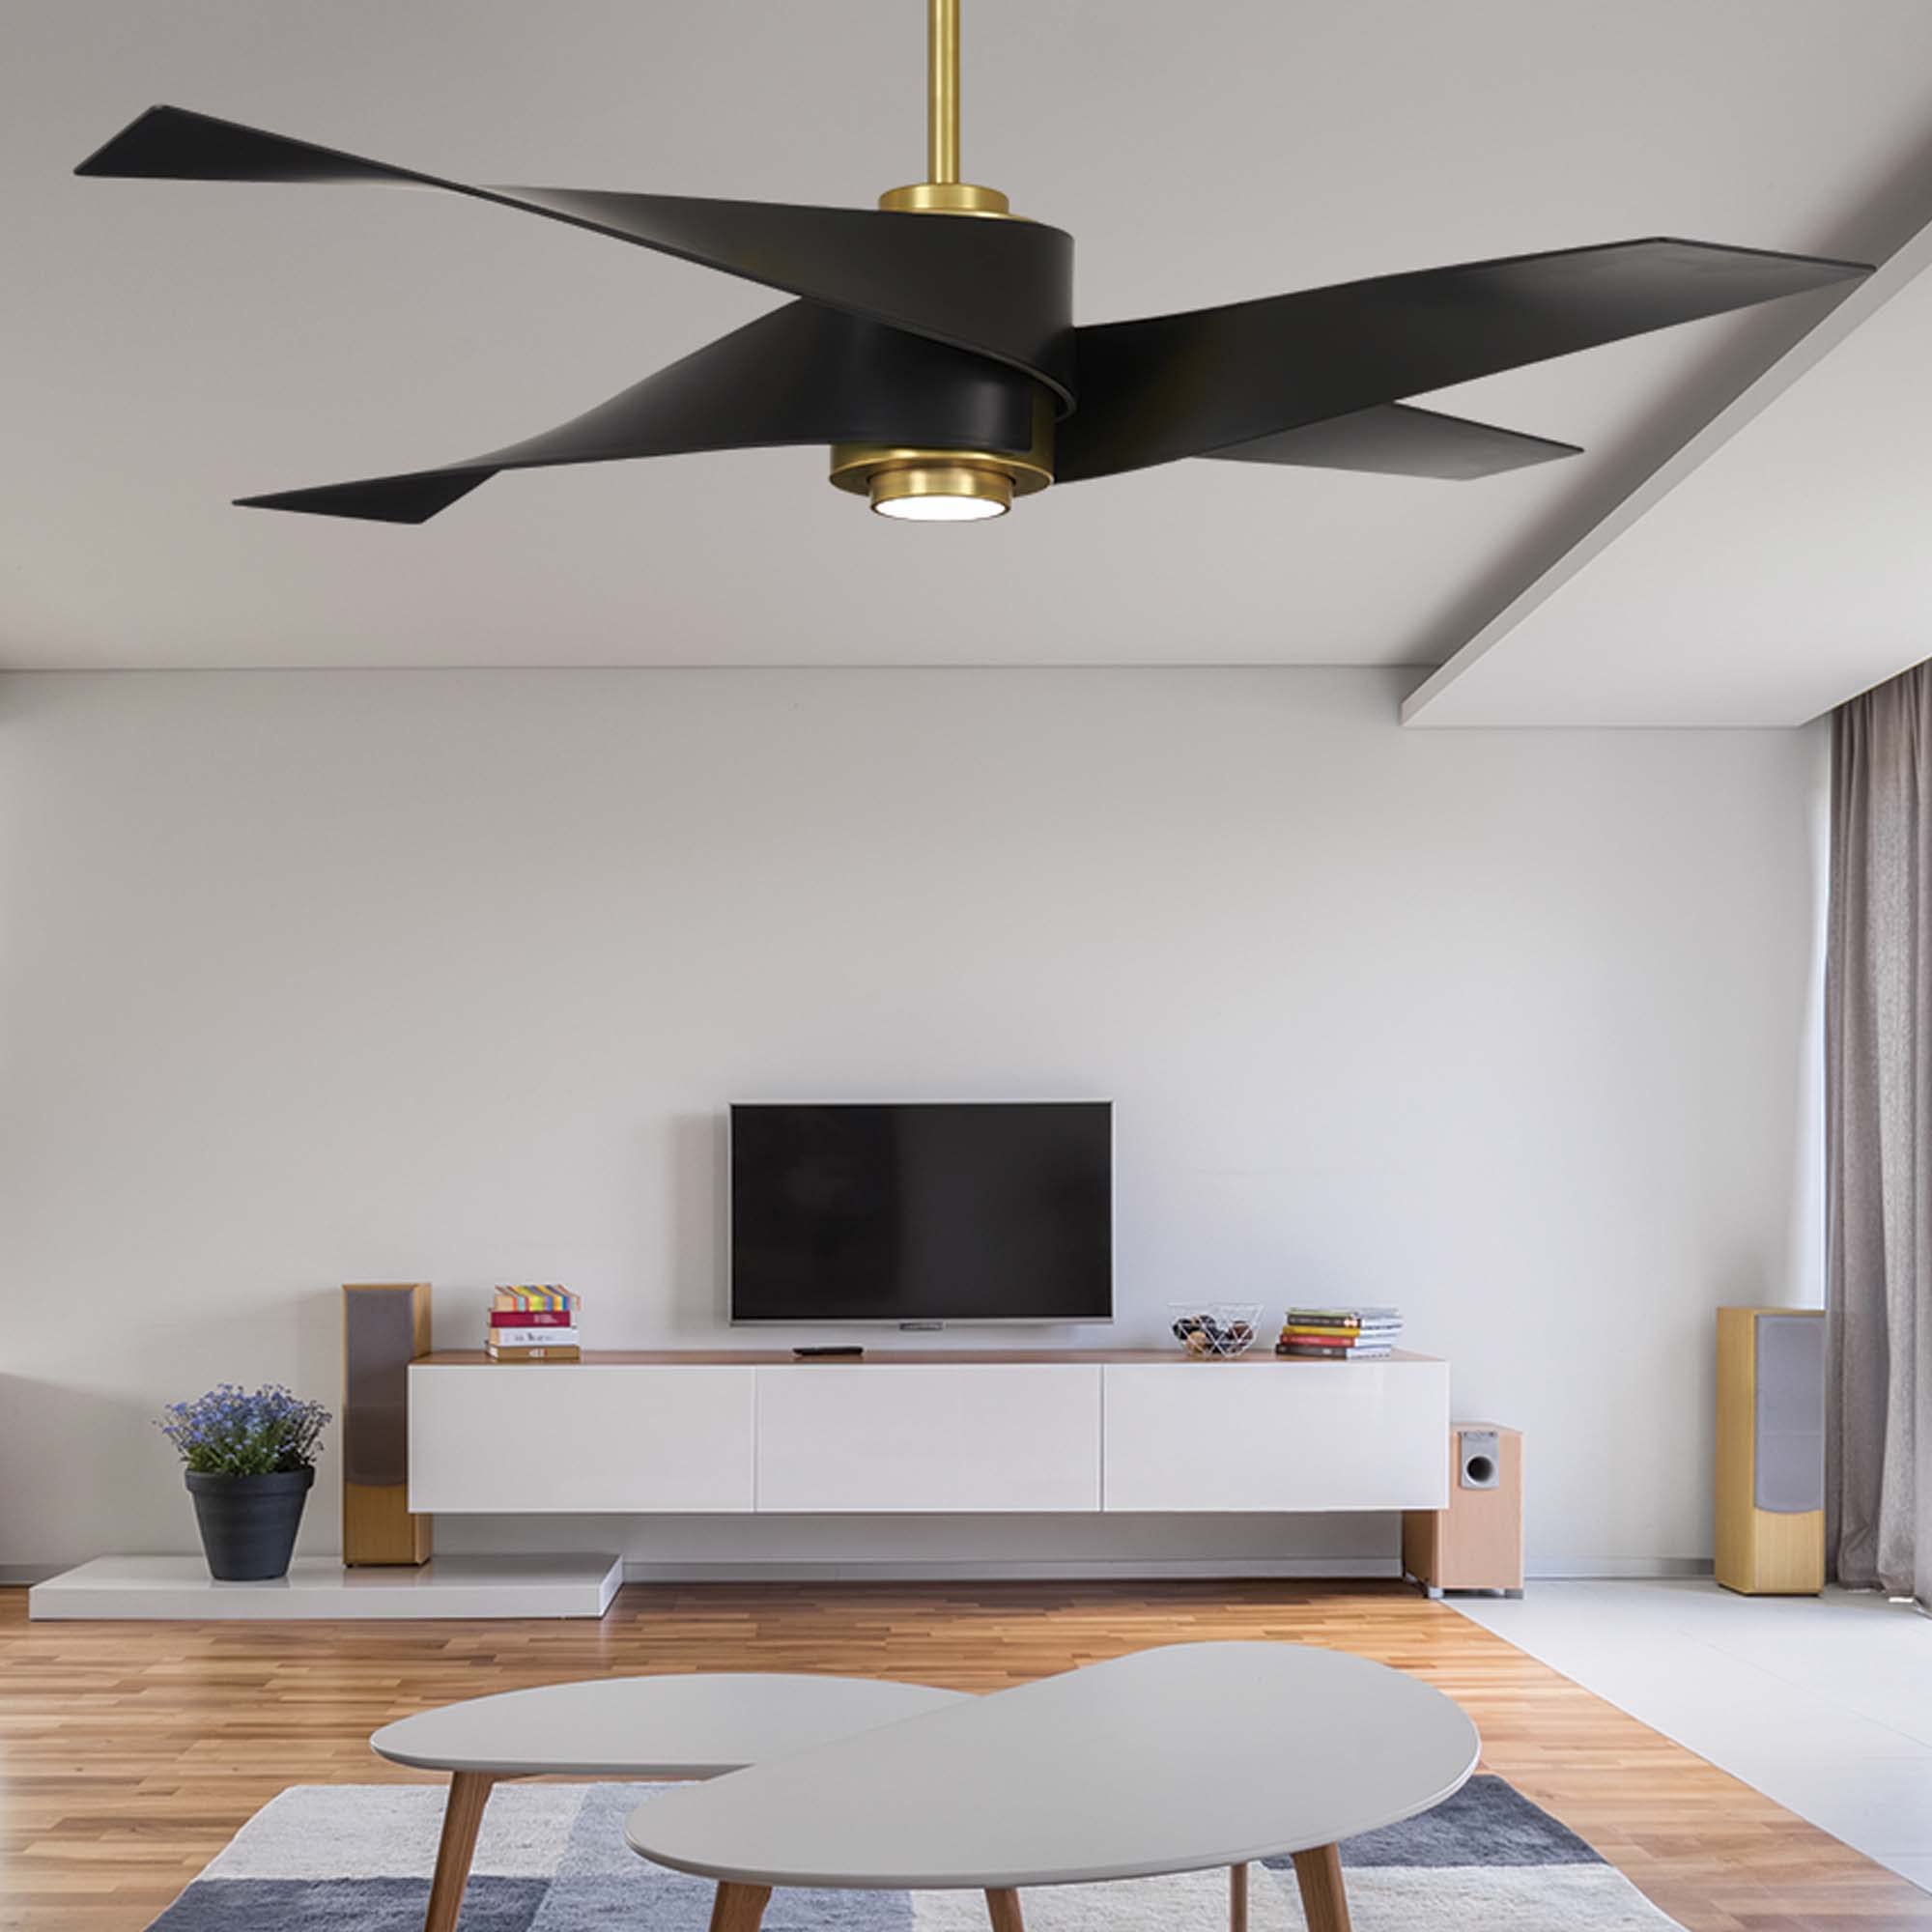 MINKA-AIRE F903L-SBR/MBK Artemis IV 64 Inch Ceiling Fan with LED Light and DC Motor in Soft Brass Finish and Matte Black Blades